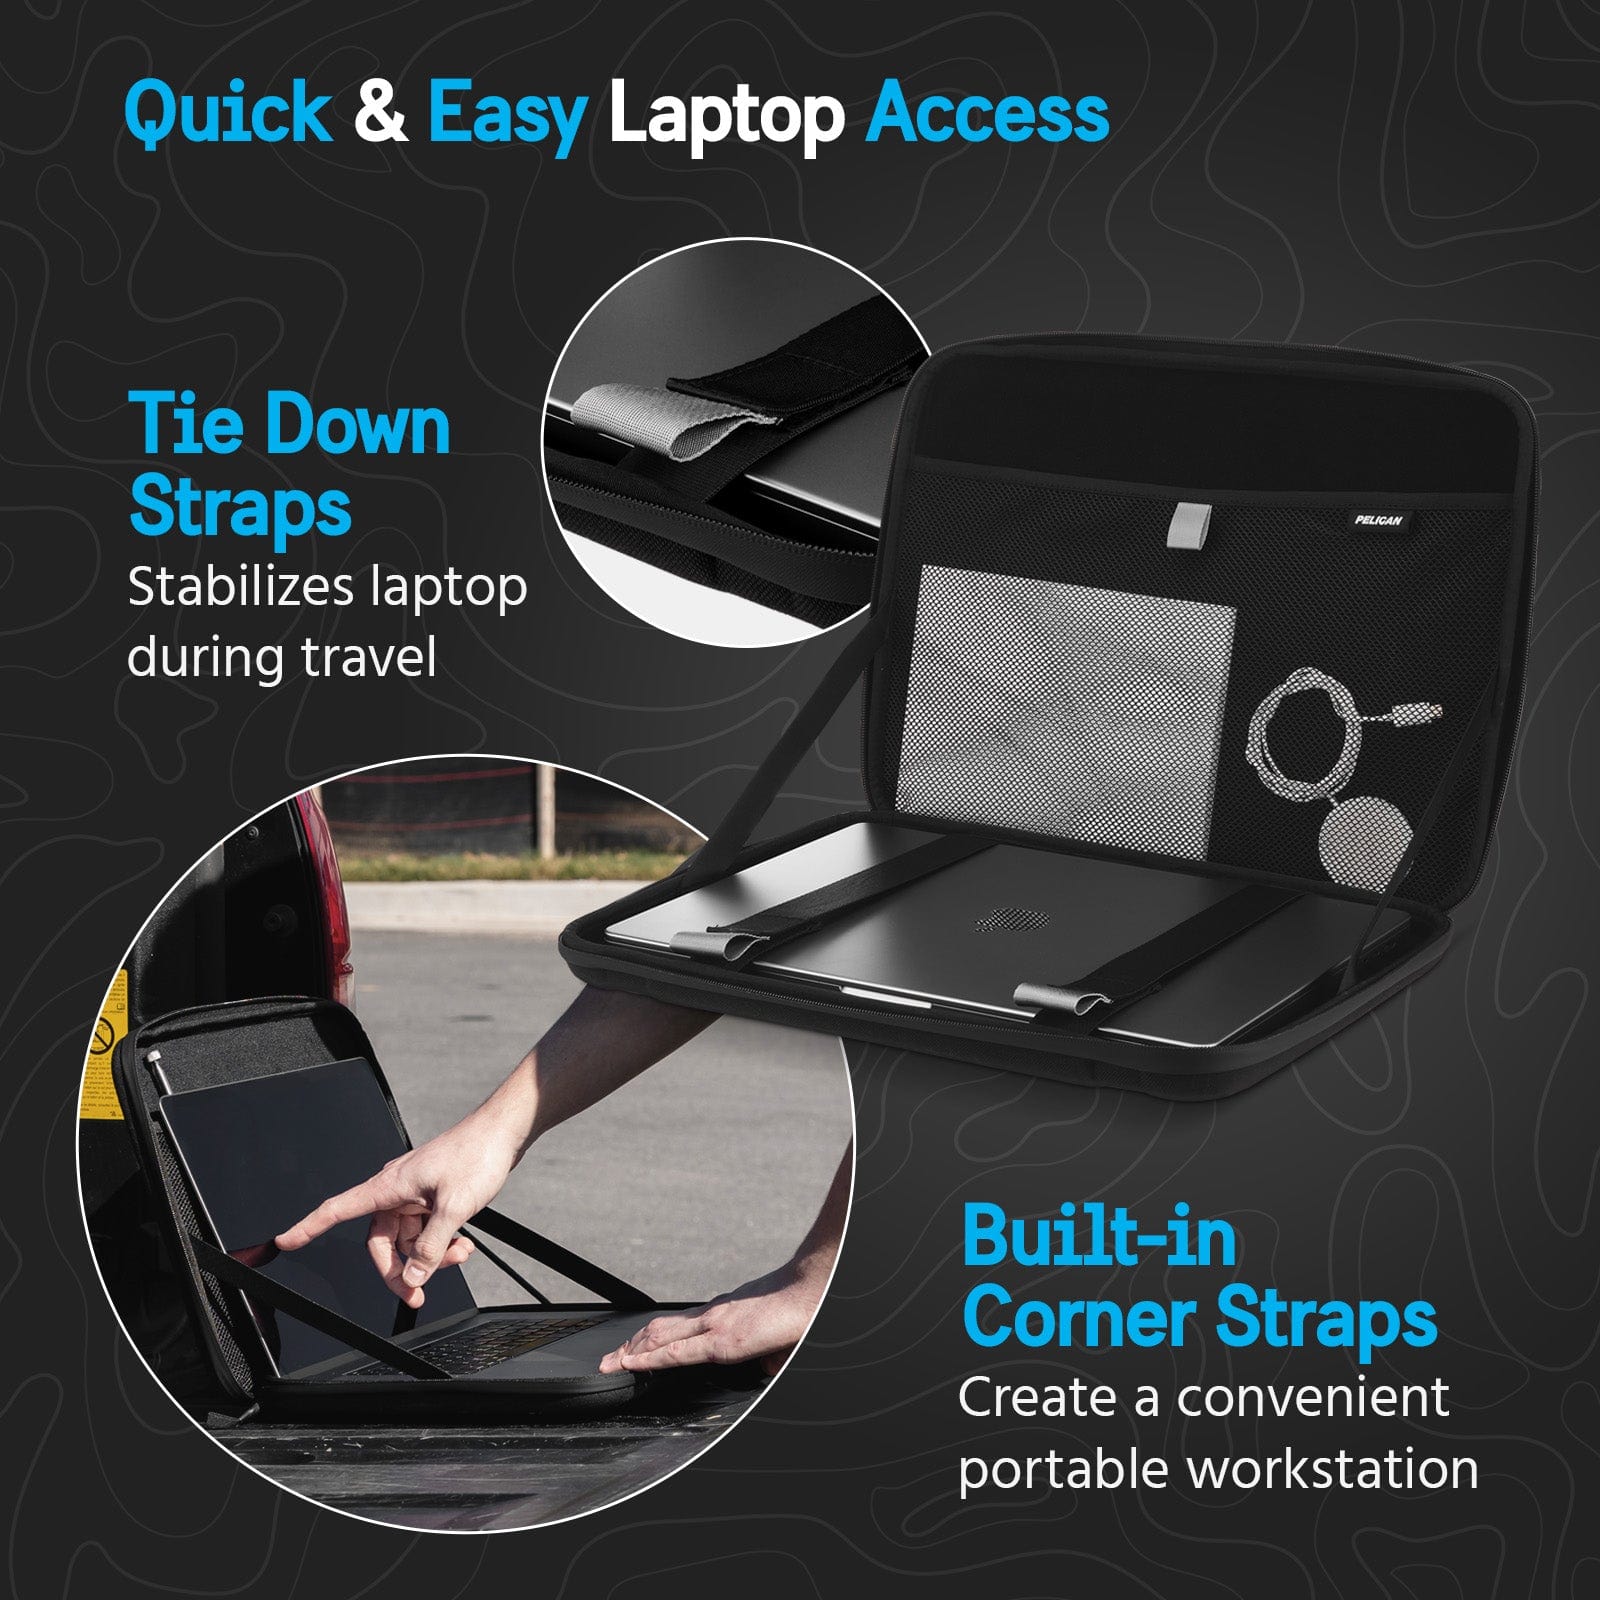 QUICK AND EASY LAPTOP ACCESS. TIE DOWN STRAPS STABILIZES LAPTOP DURING TRAVEL. BUILT IN CORNER STRAPS CREATE A CONVENIENT PORTABLE WORKSTATION.